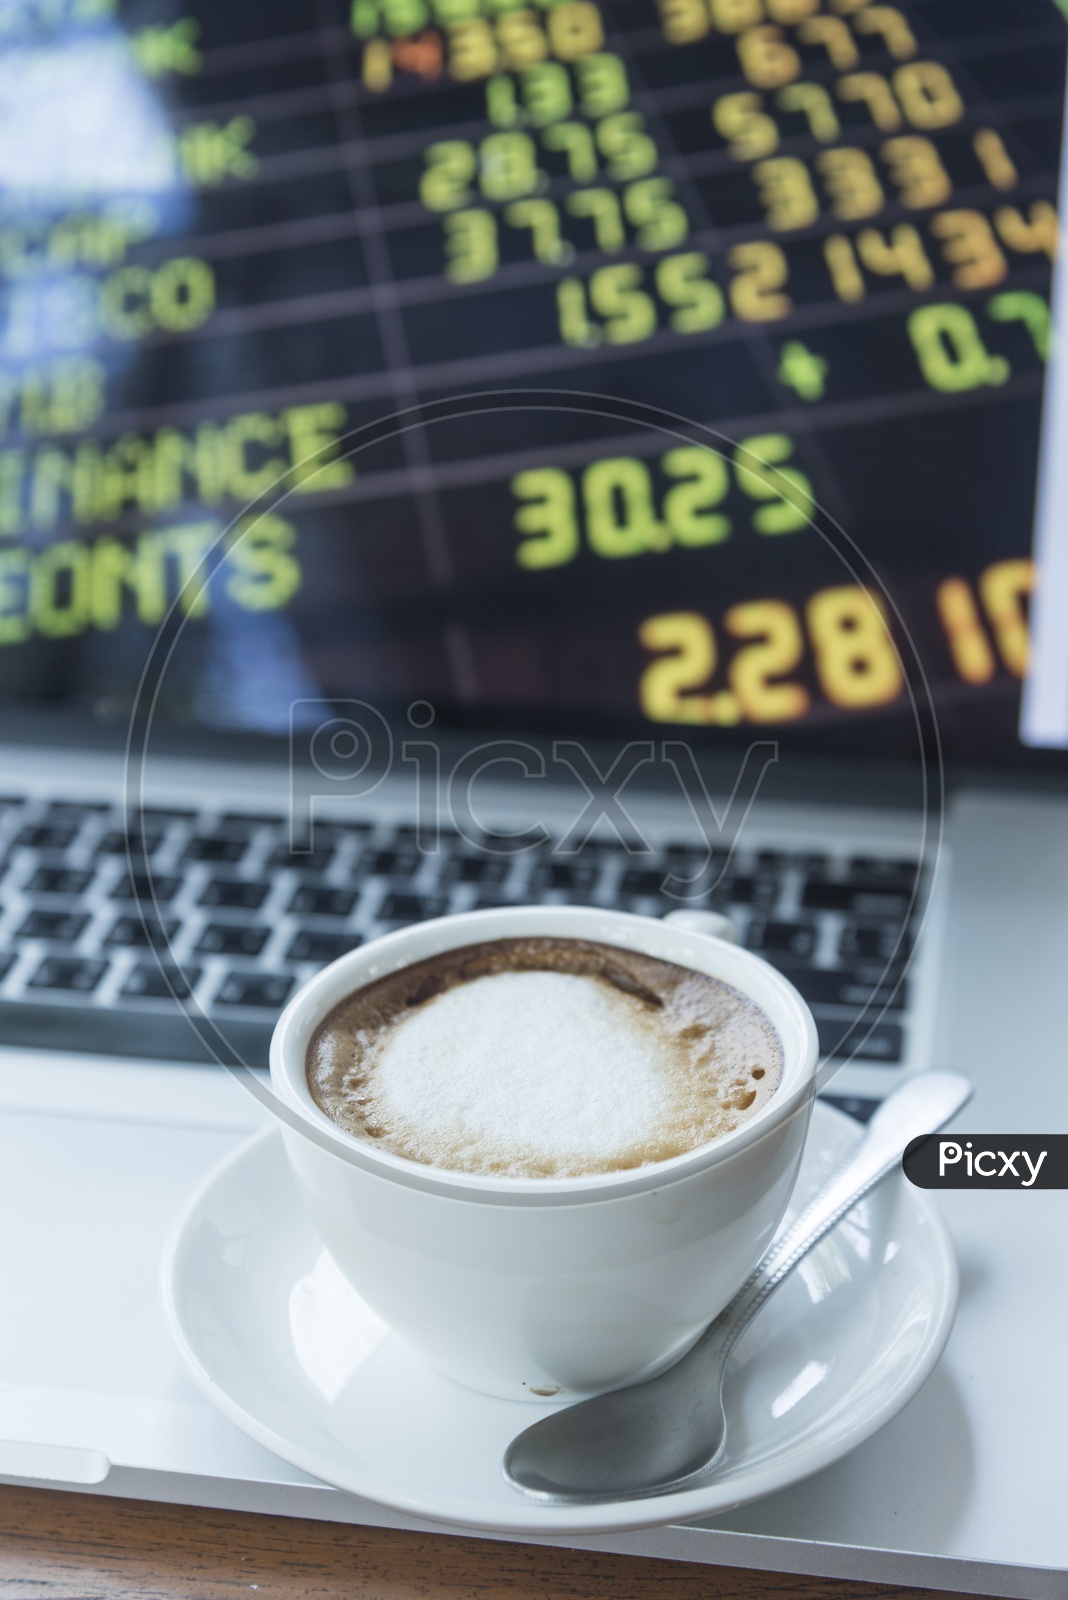 A Coffee Cup with Stock Markets Data on Laptop Screen